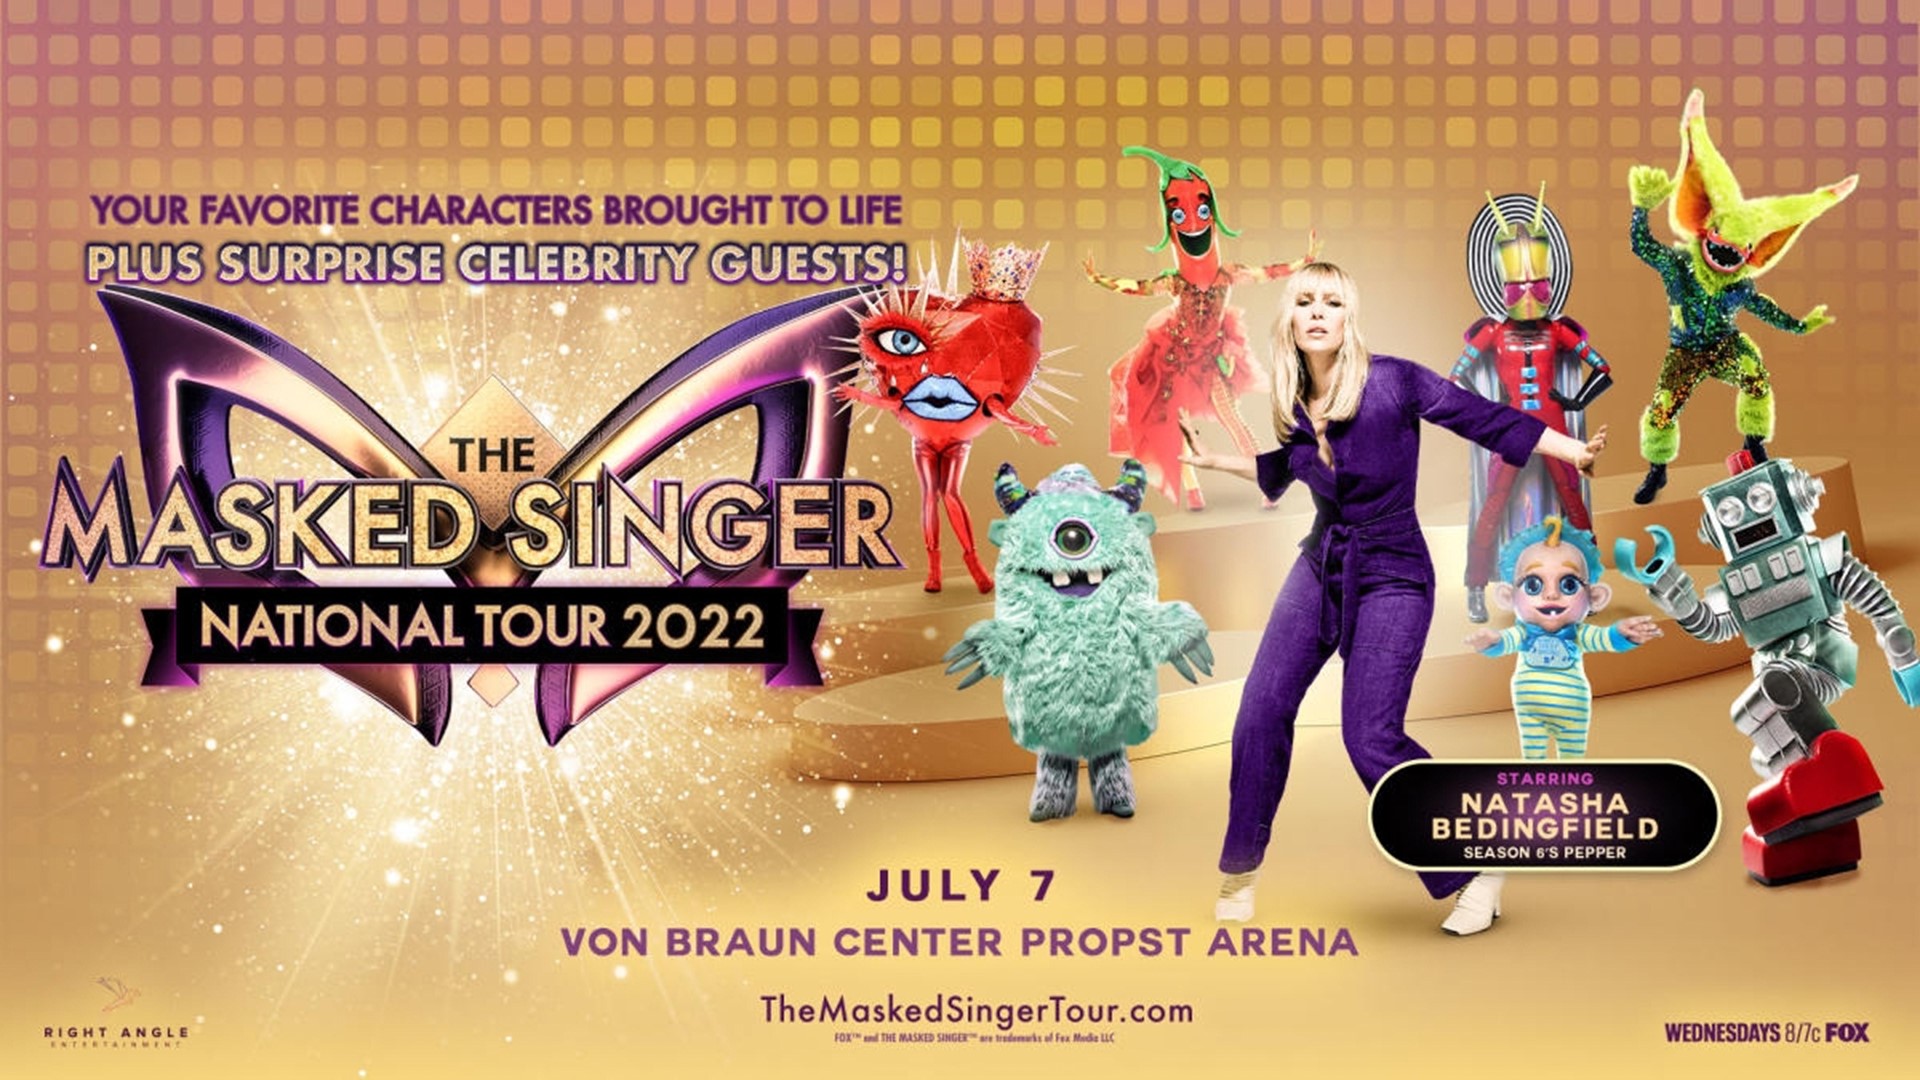 Enter to win a pair of tickets to The Masked Singer LIVE at the VBC!